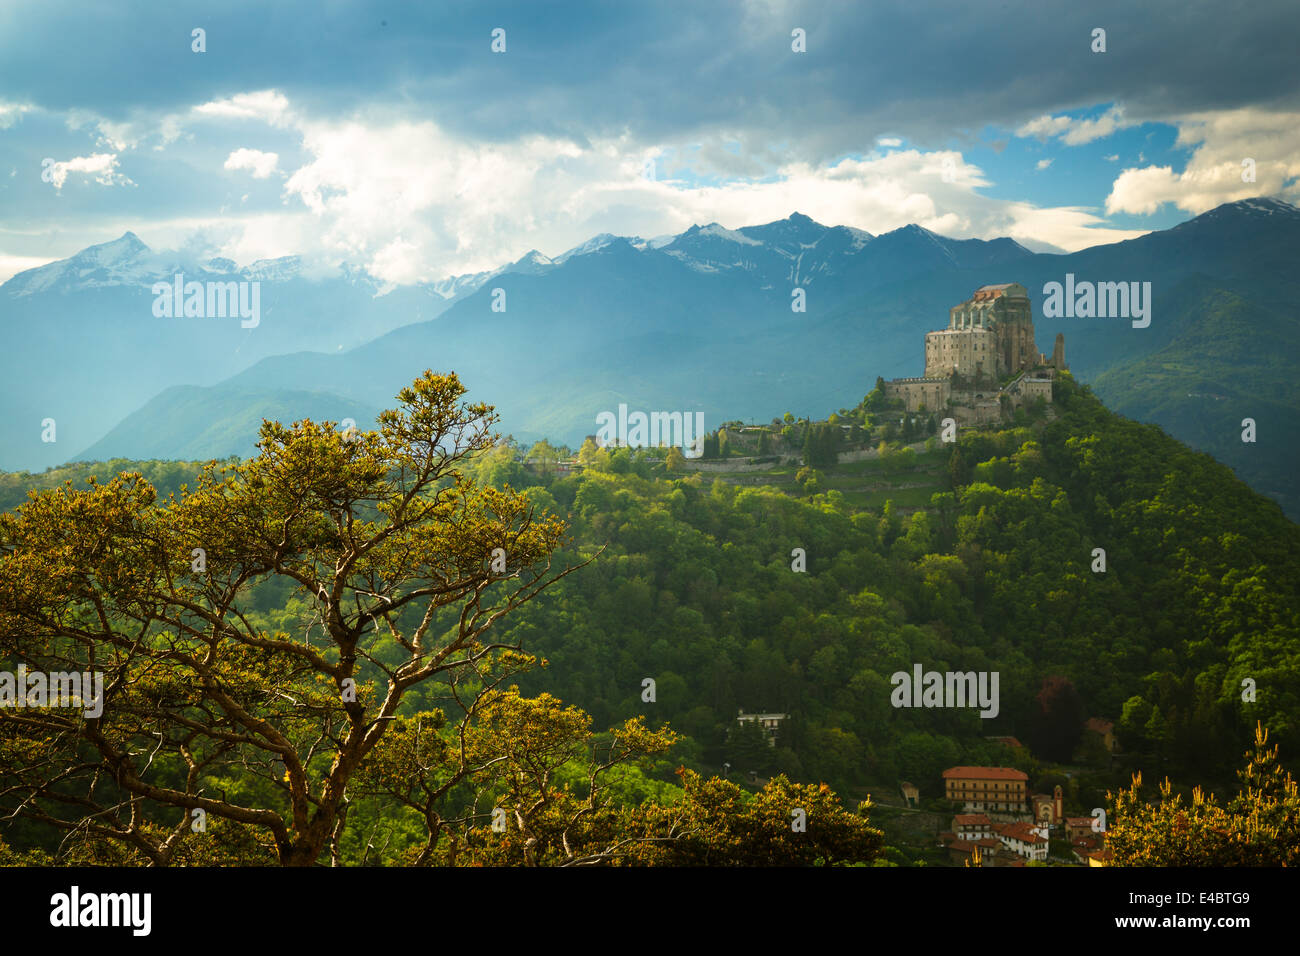 The monastery church of Sacra di San Michele in the Susa Valley, Italy. The Alps rise up in the background with Rocciamelone the most prominent peak. Stock Photo